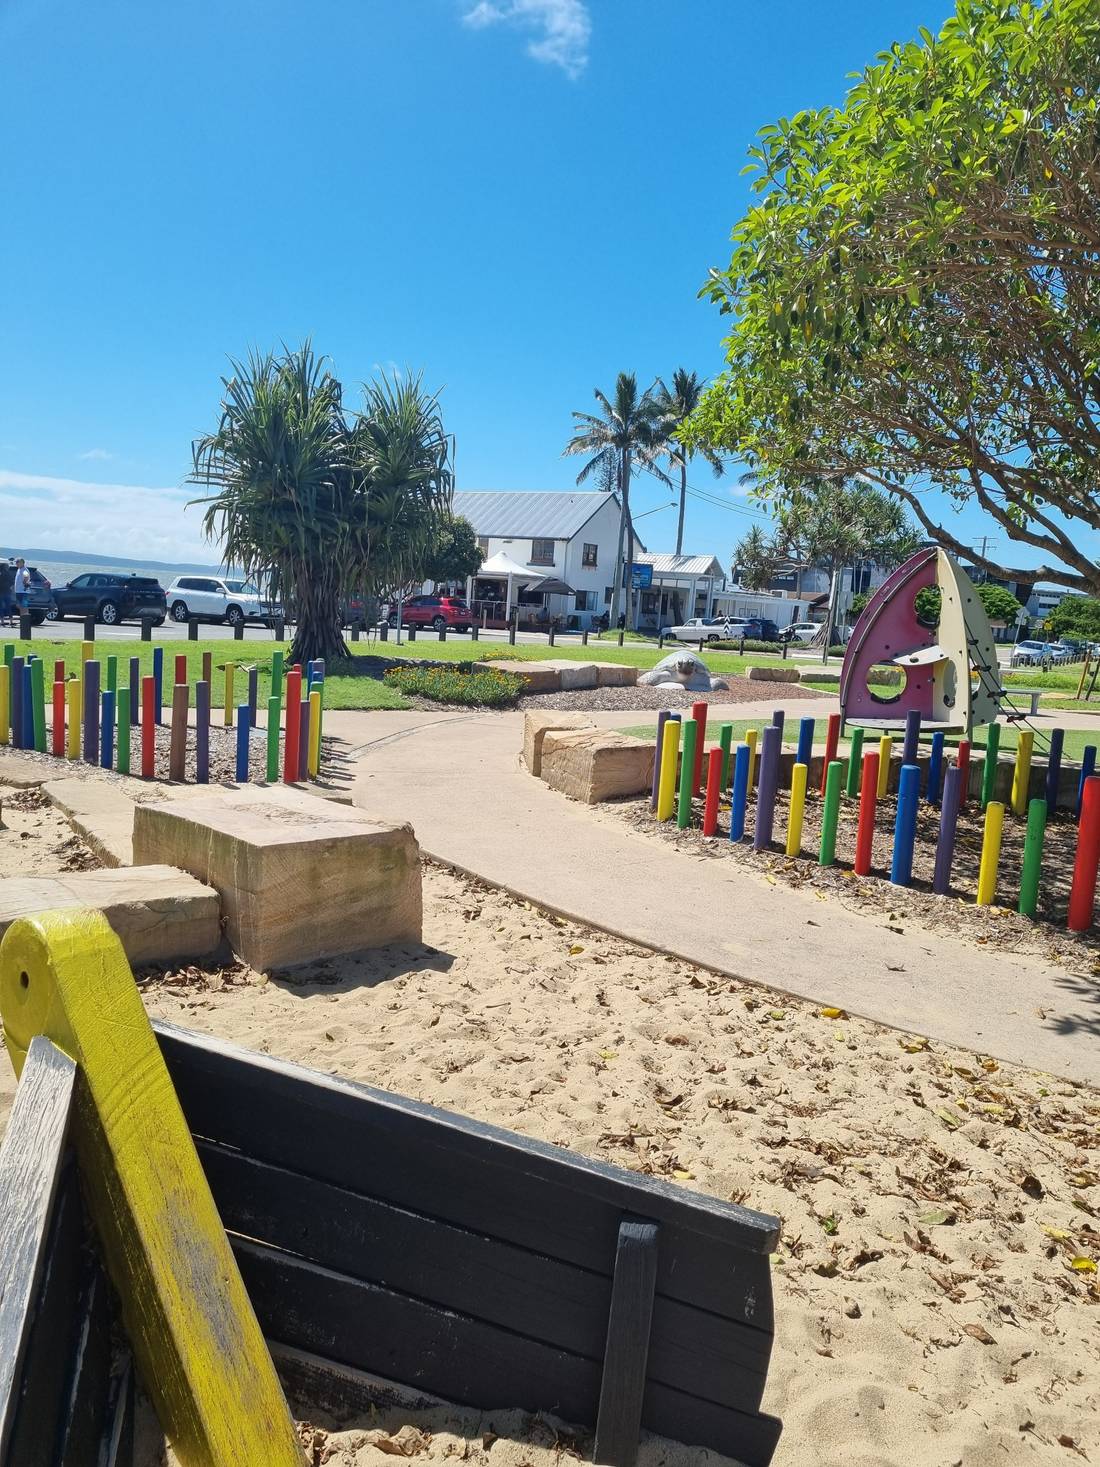 Out at Cleveland Point there’s the Lighthouse Restaurant and a nearby (colourful) play area for the kids.